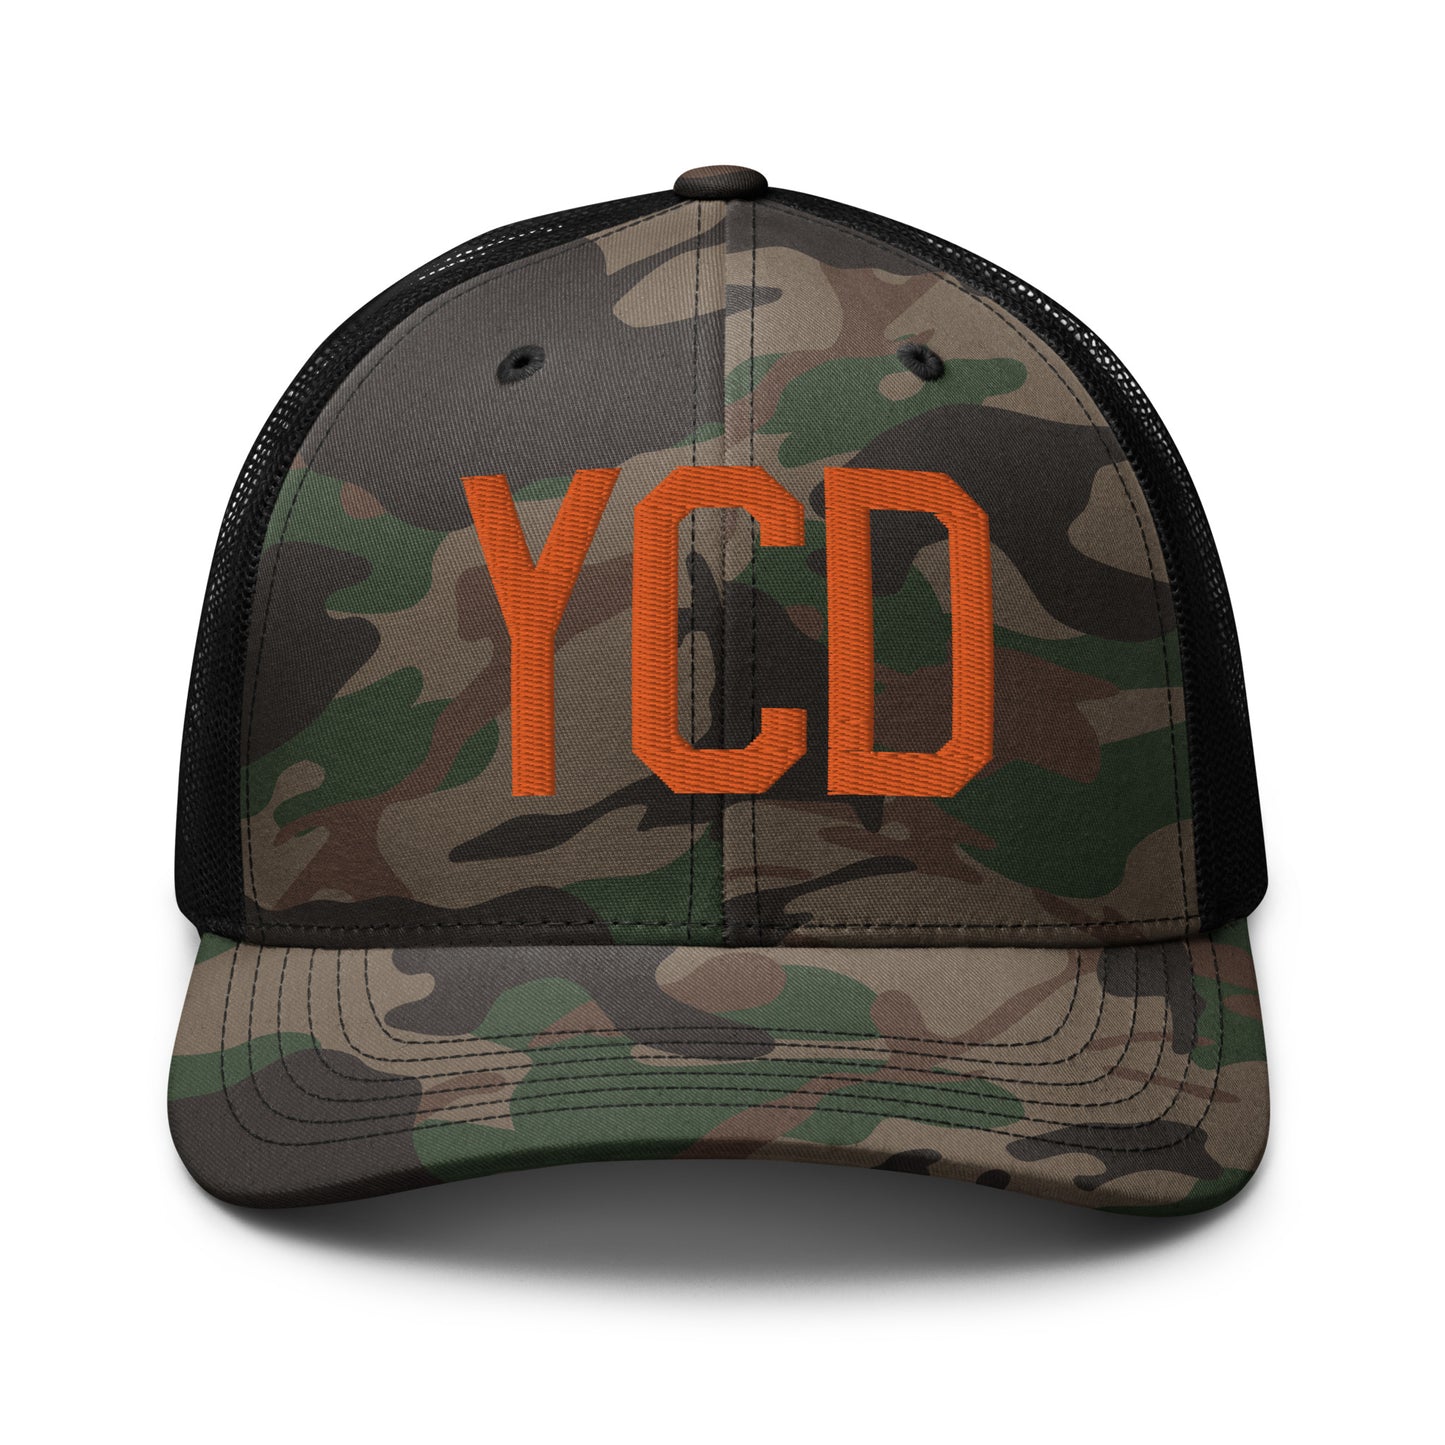 Airport Code Camouflage Trucker Hat - Orange • YCD Nanaimo • YHM Designs - Image 10